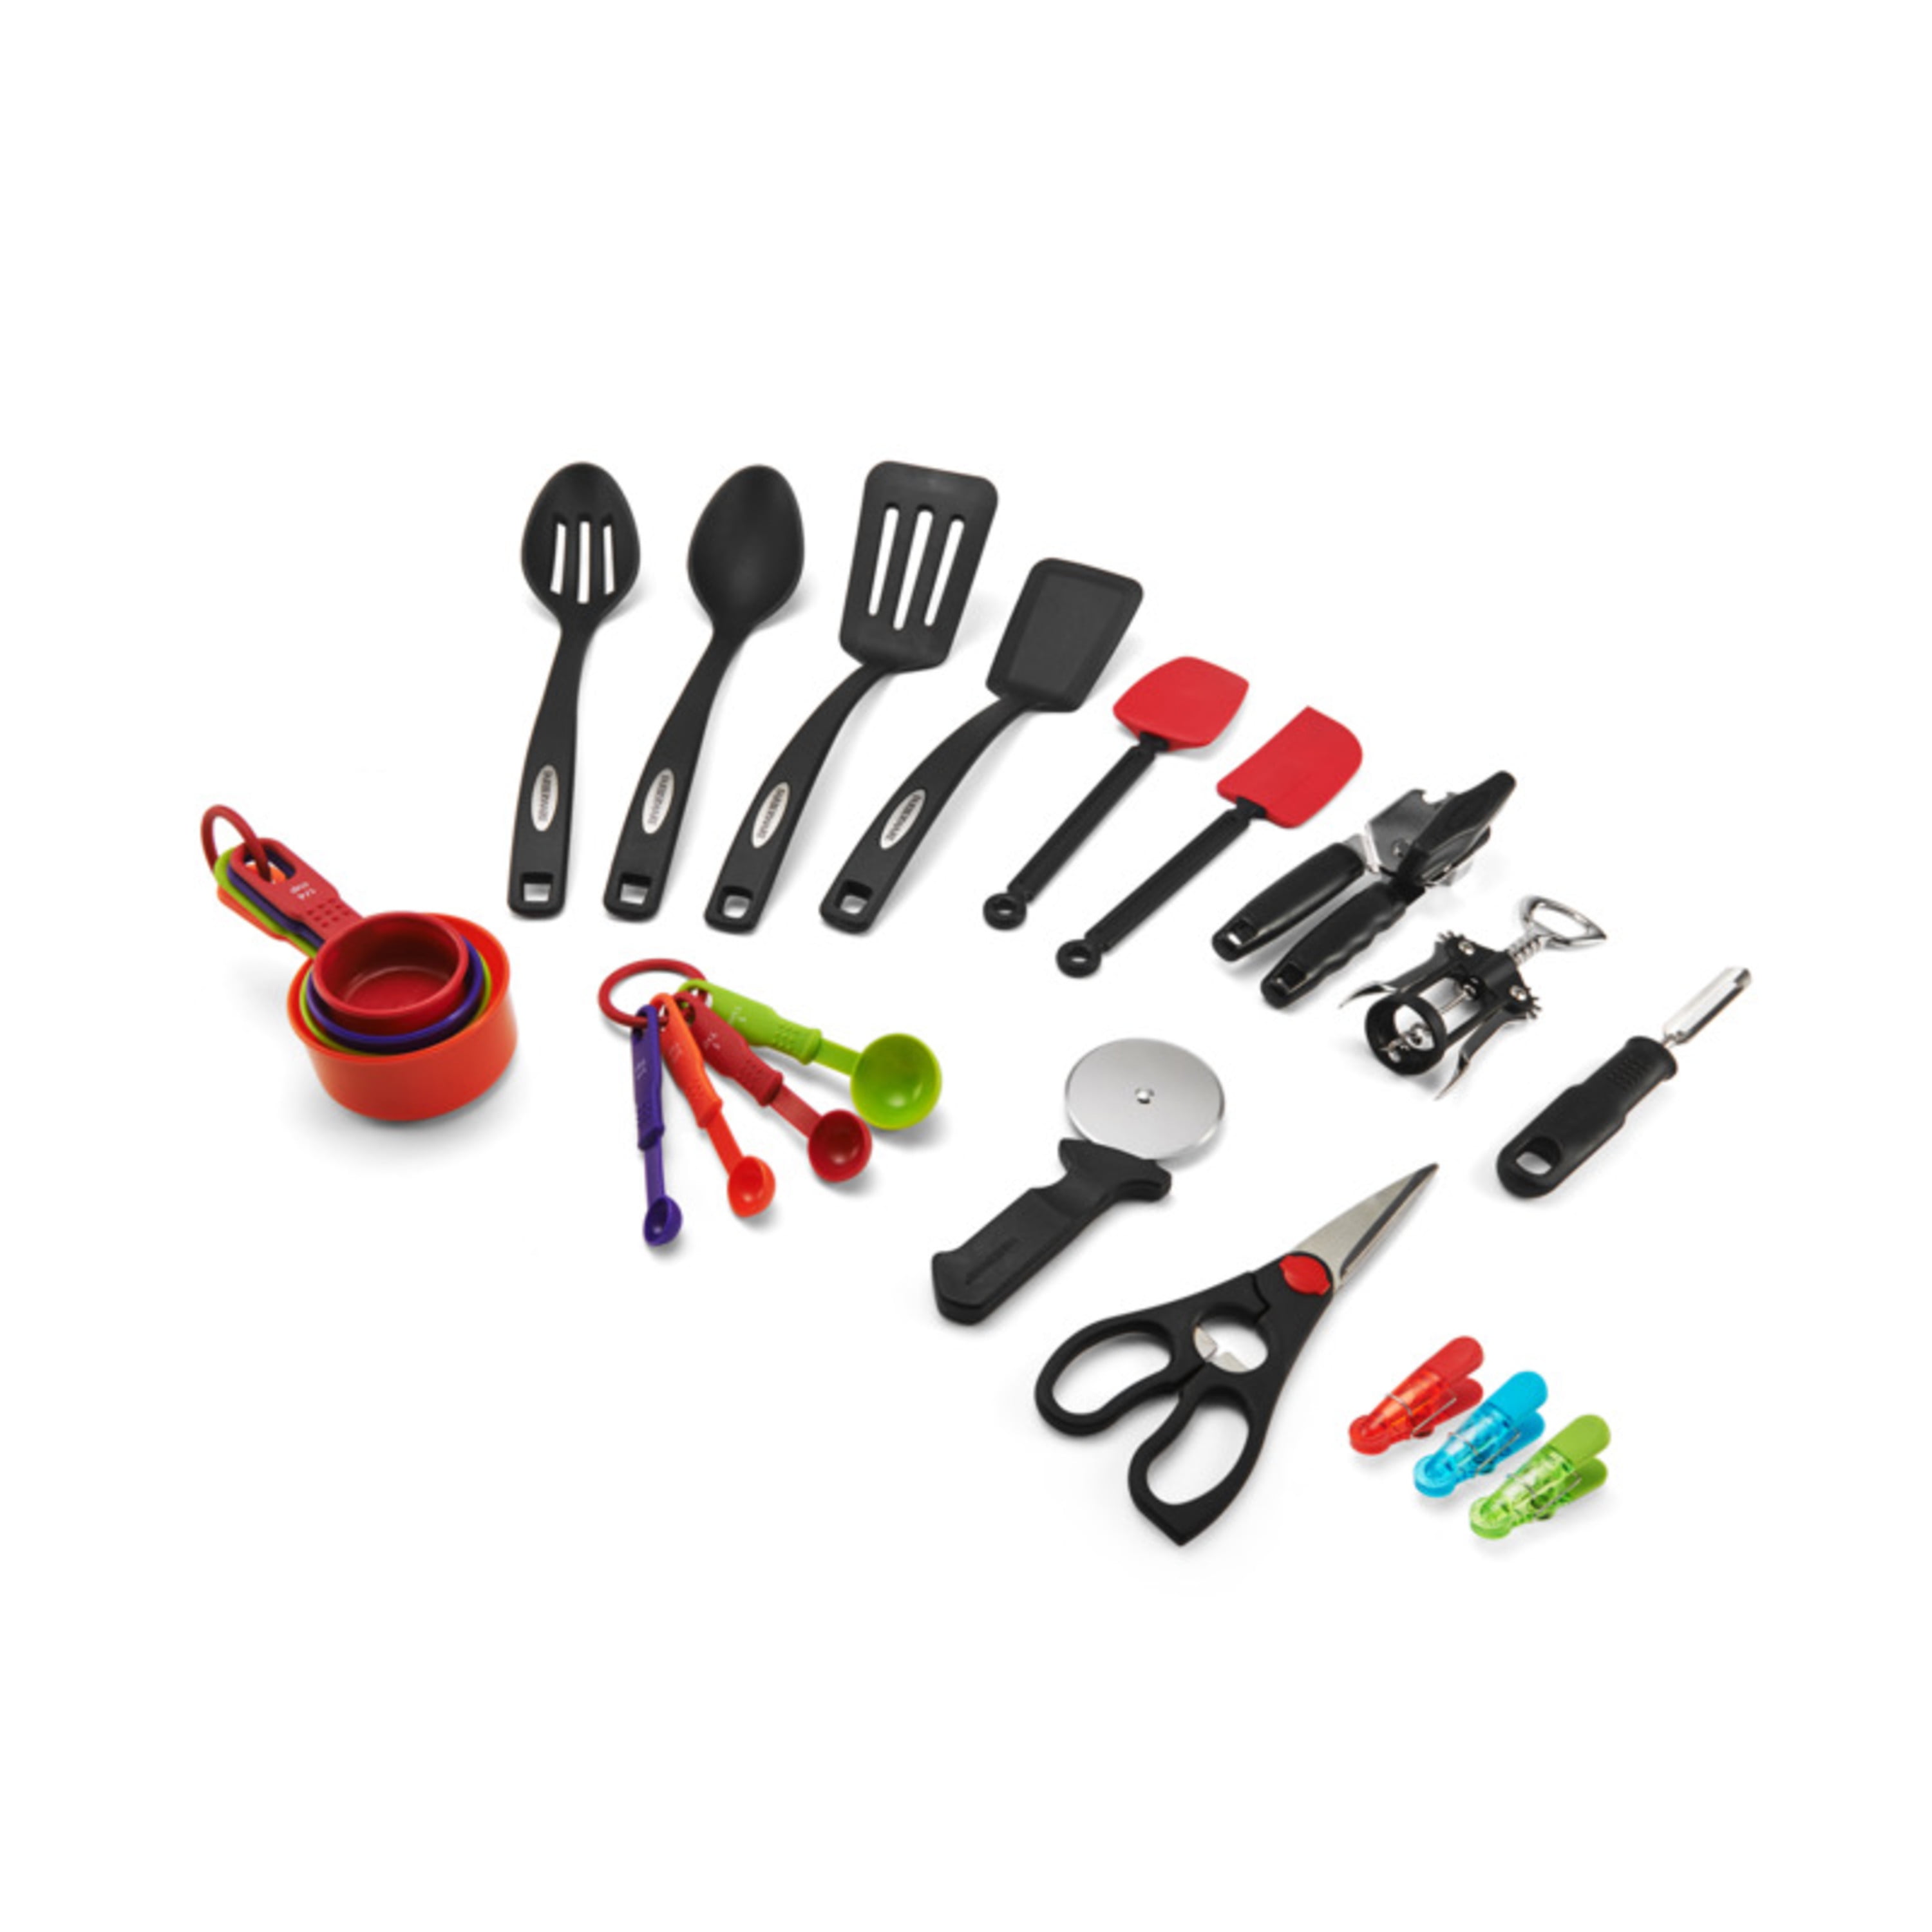 Tools of the Trade 22-Pc. Kitchen Gadget Set, Created for Macy's